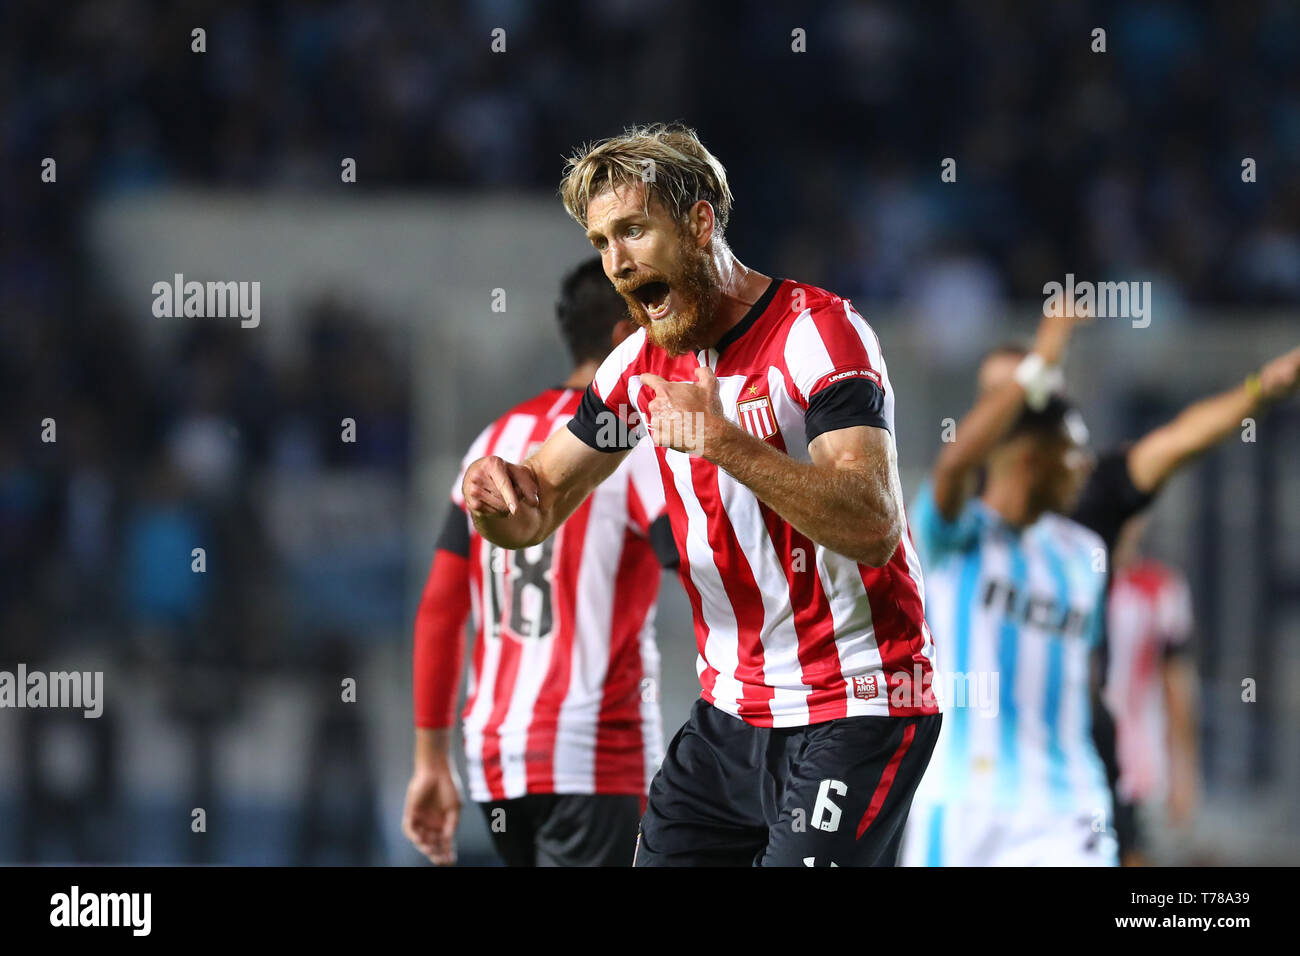 Buenos Aires, Argentina - May 04, 2019: Jonathan Schunke screaming in anger for a foul validated in favor of Racing Club in Avellaneda, Buenos Aires Stock Photo